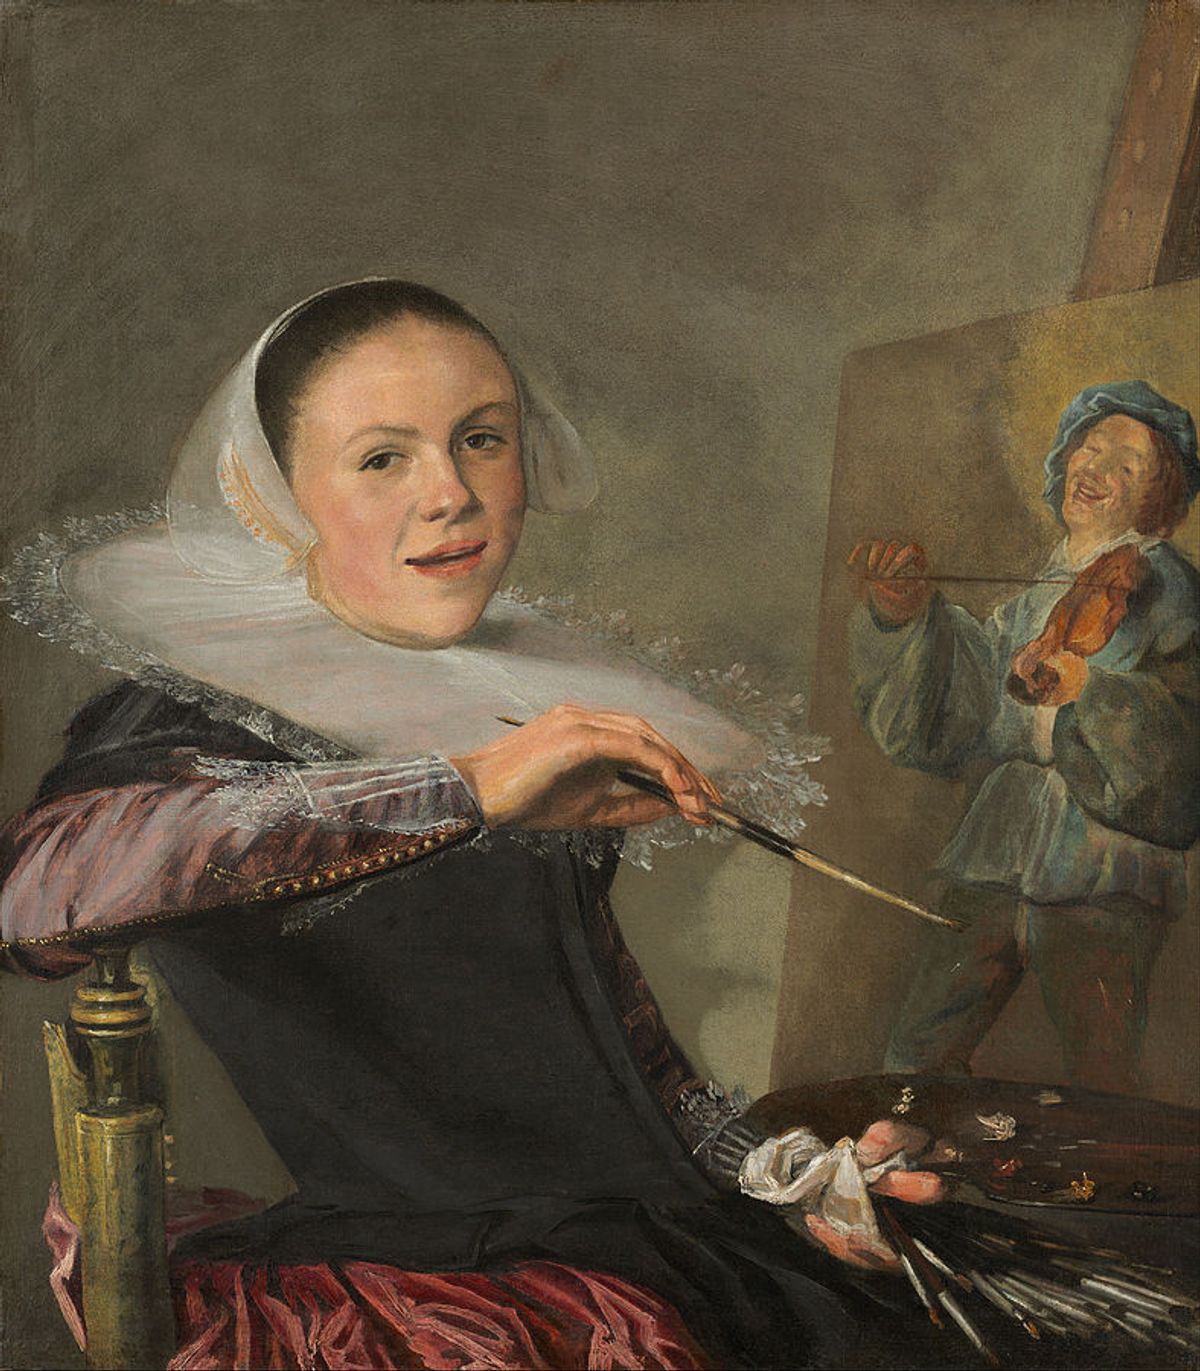 Judith Leyster's Self-portrait (around 1633), part of the collection at the National Gallery of Art, Washington, DC Photo via Wikimedia